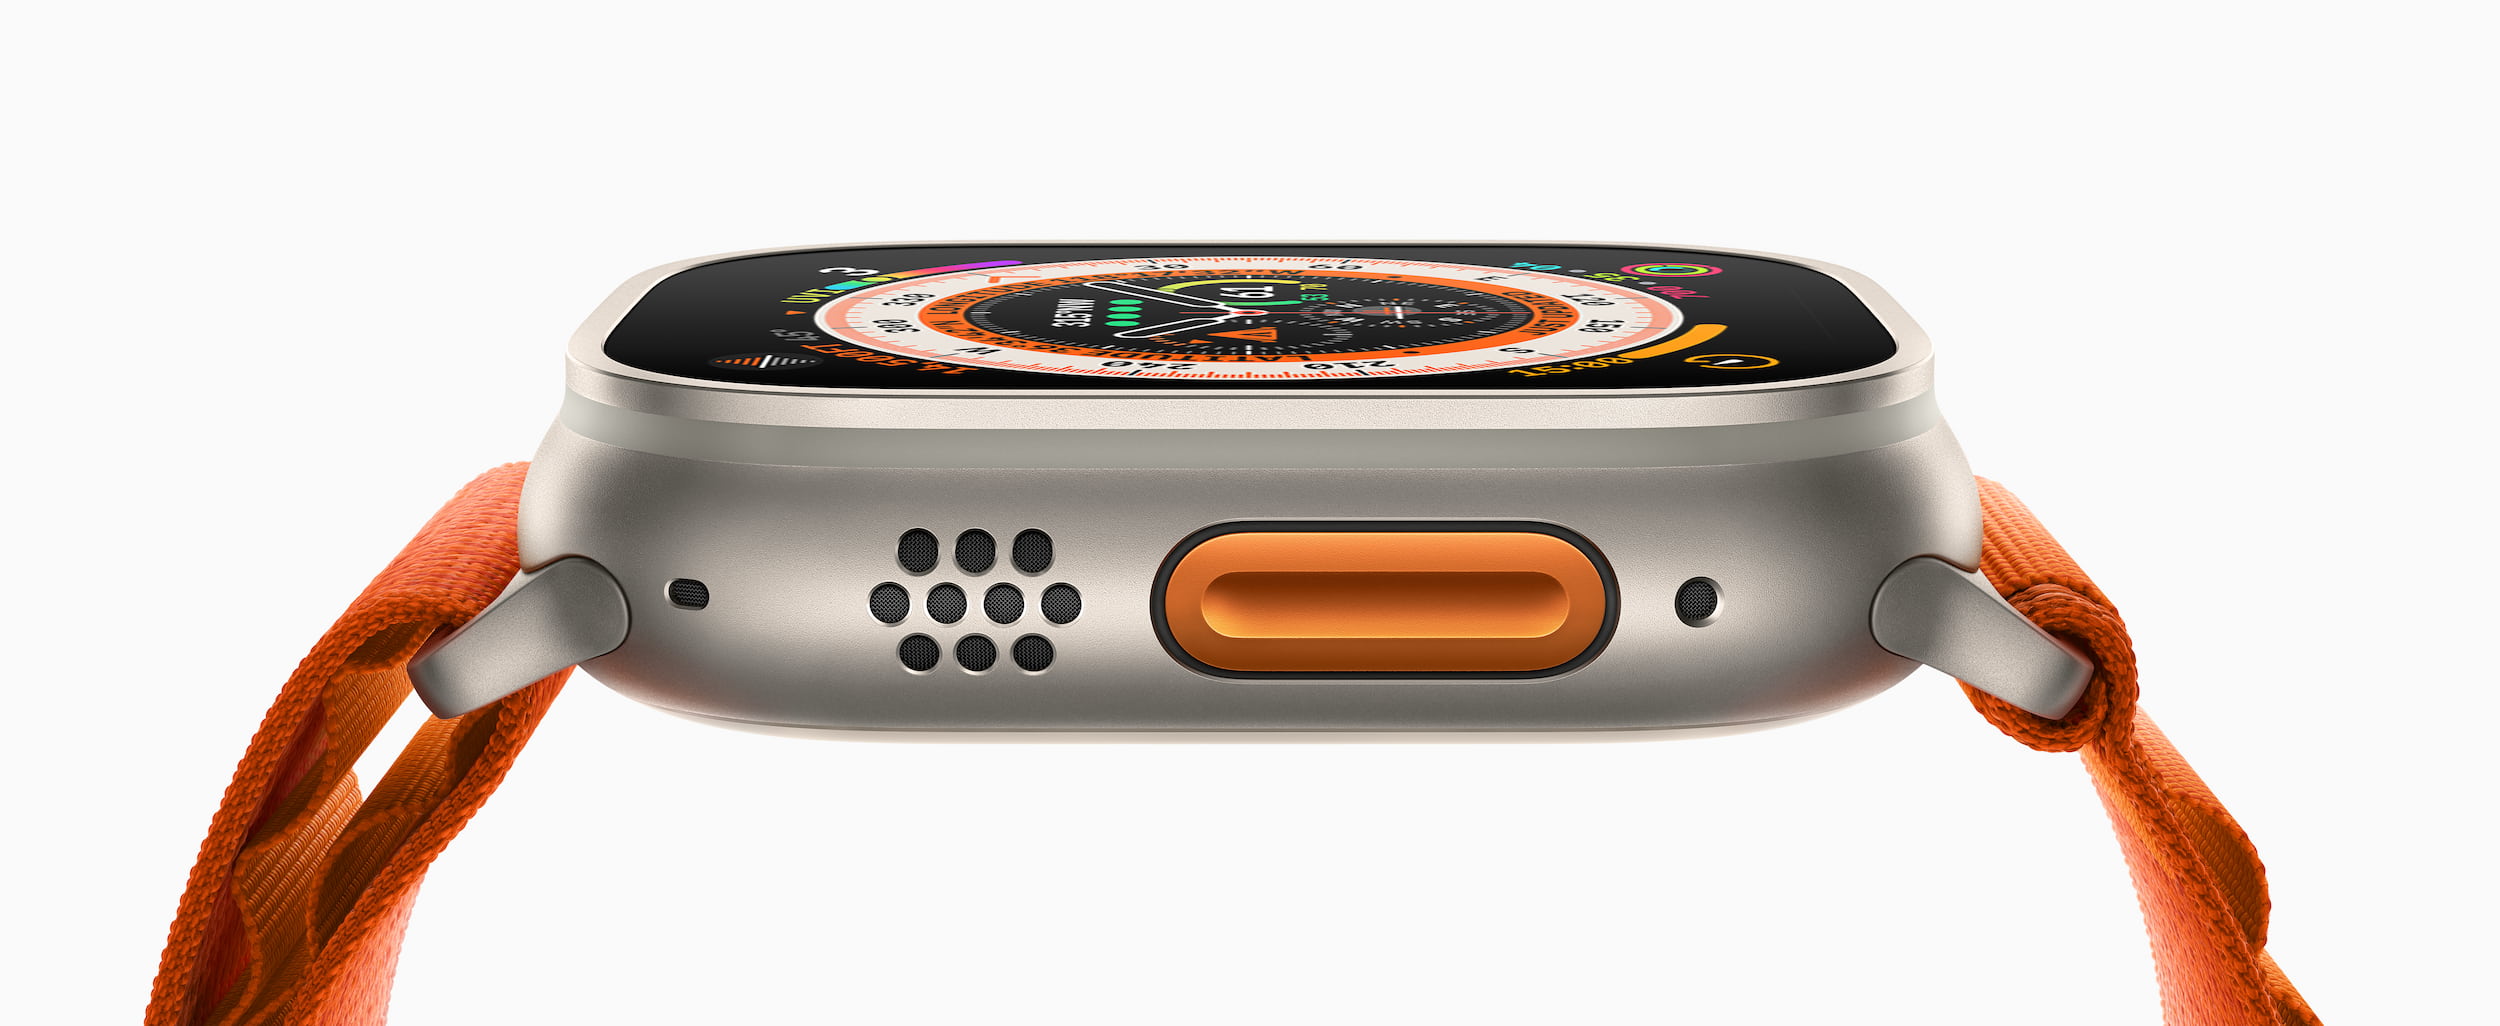 Apple Watch Ultra showing off its Action button